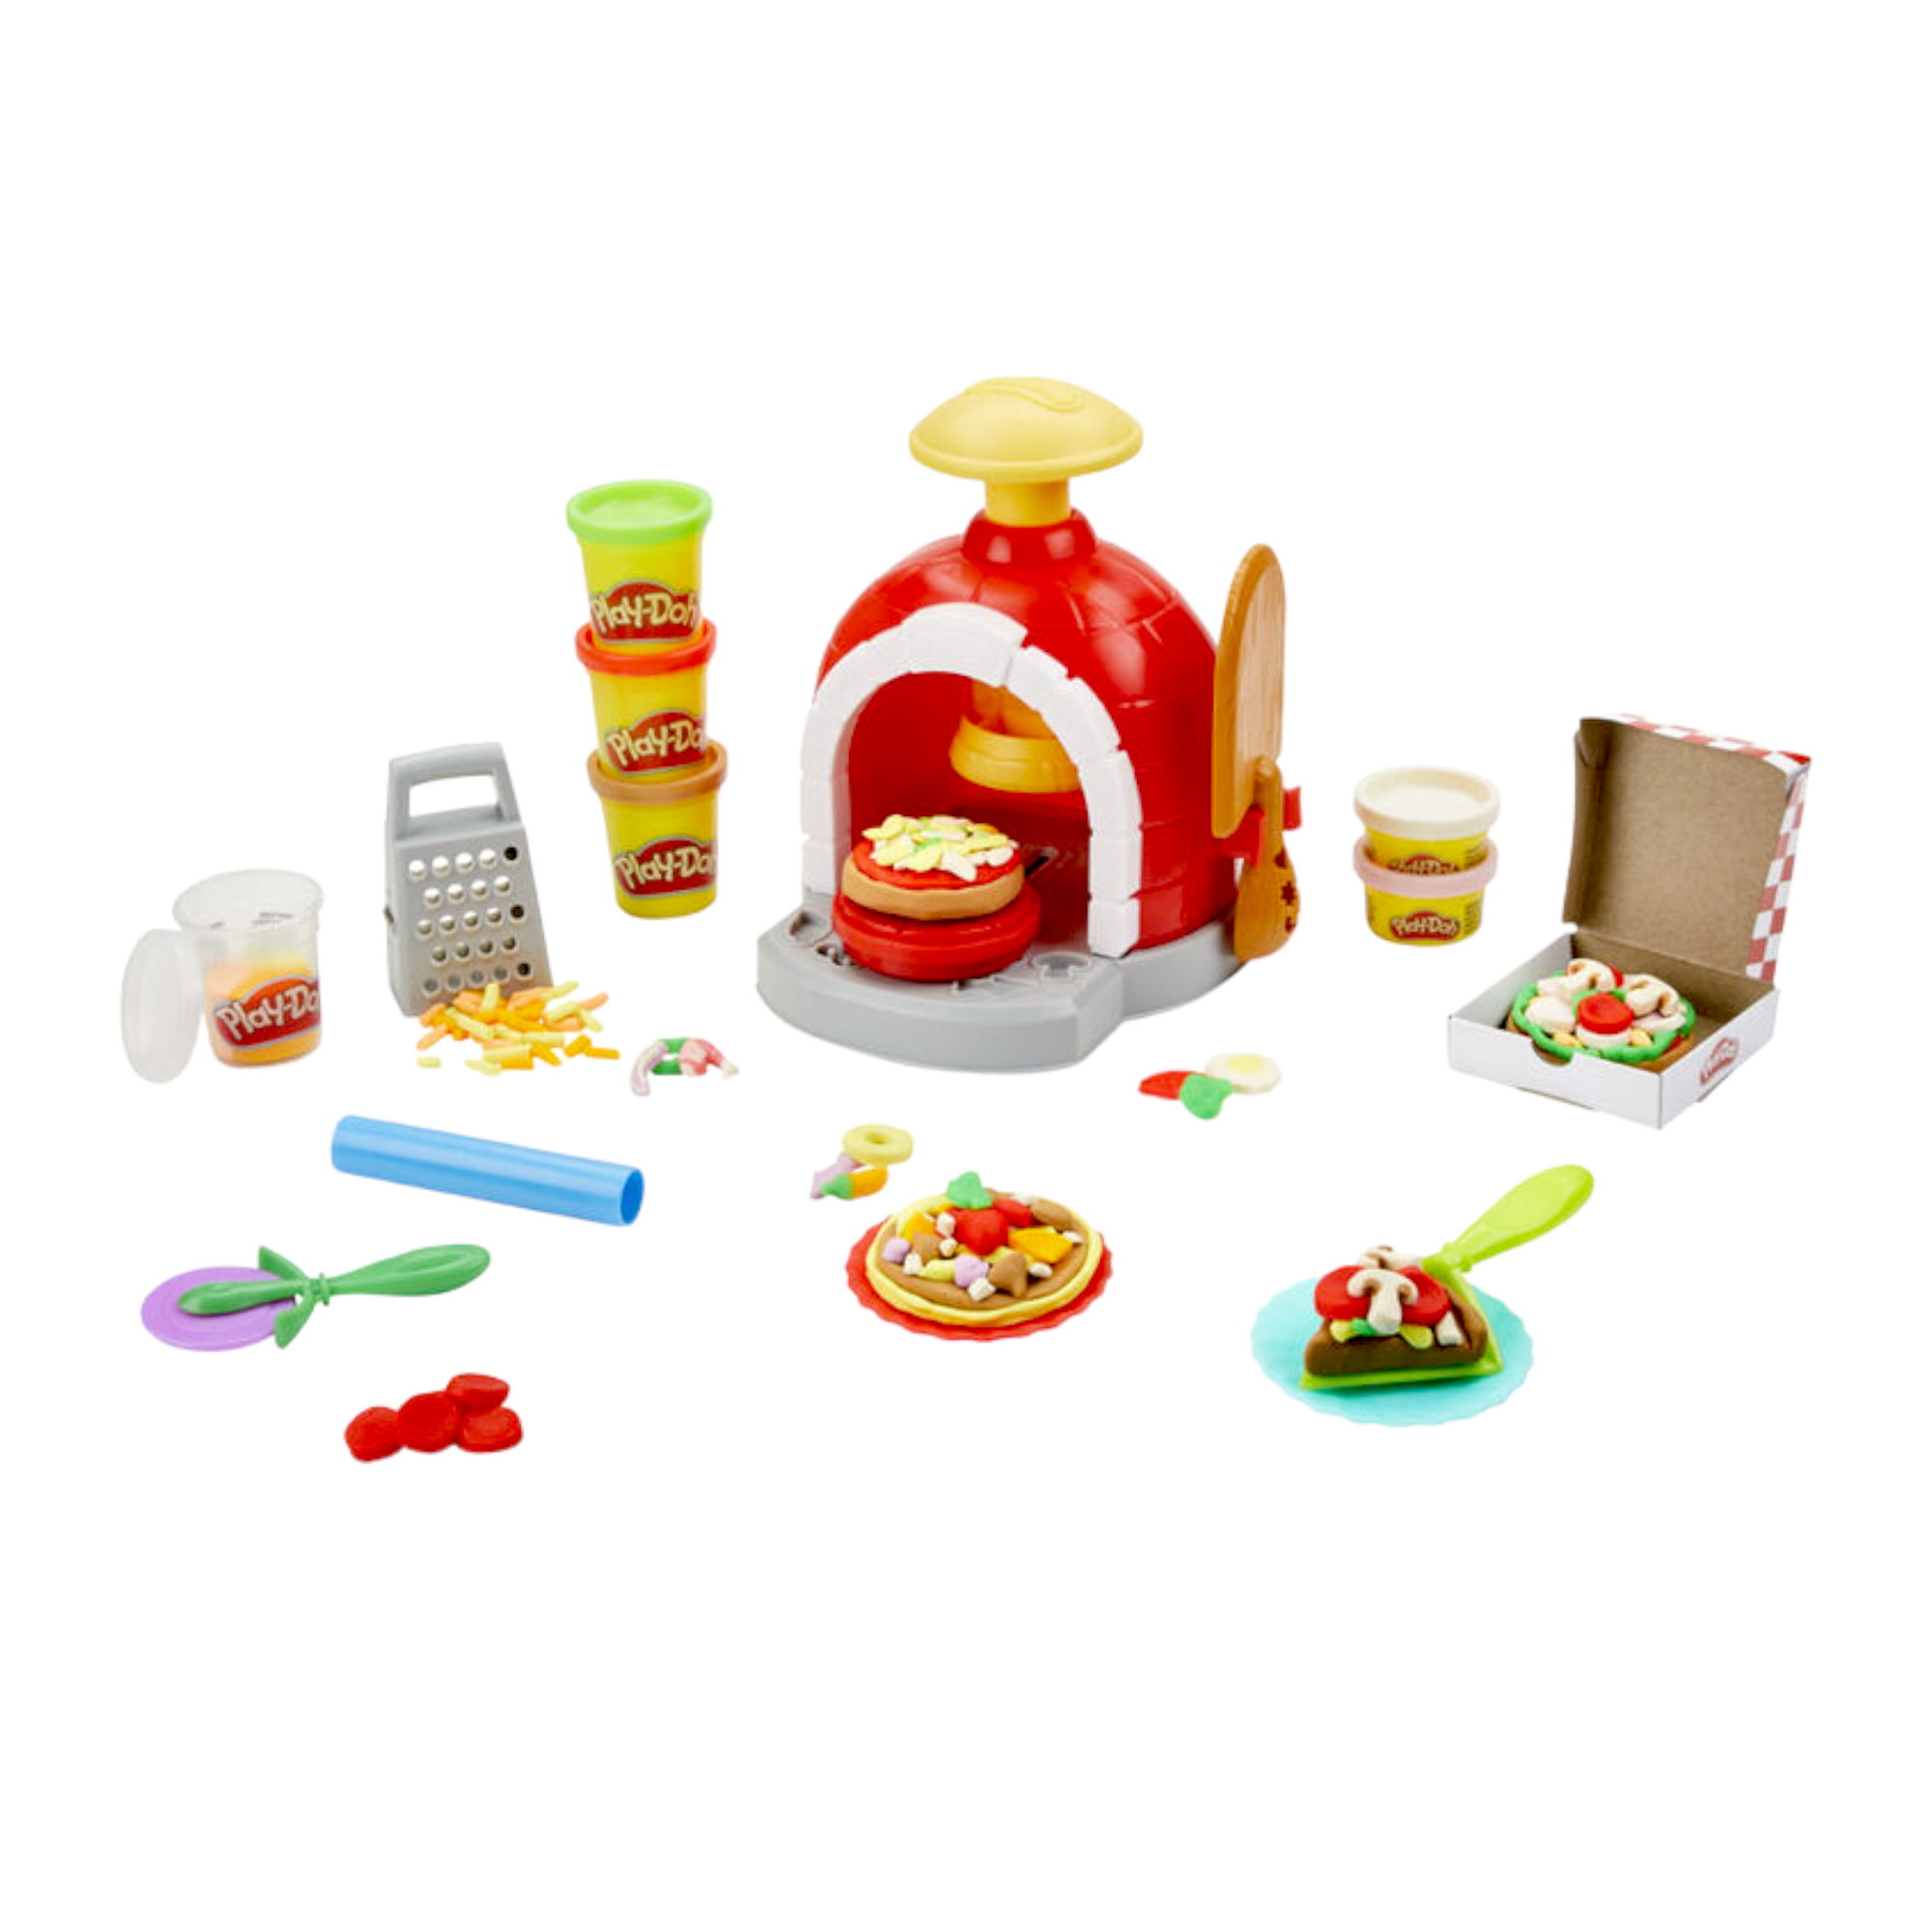 Play-Doh Kitchen Creations Breakfast Bakery Food Set with 6 Cans